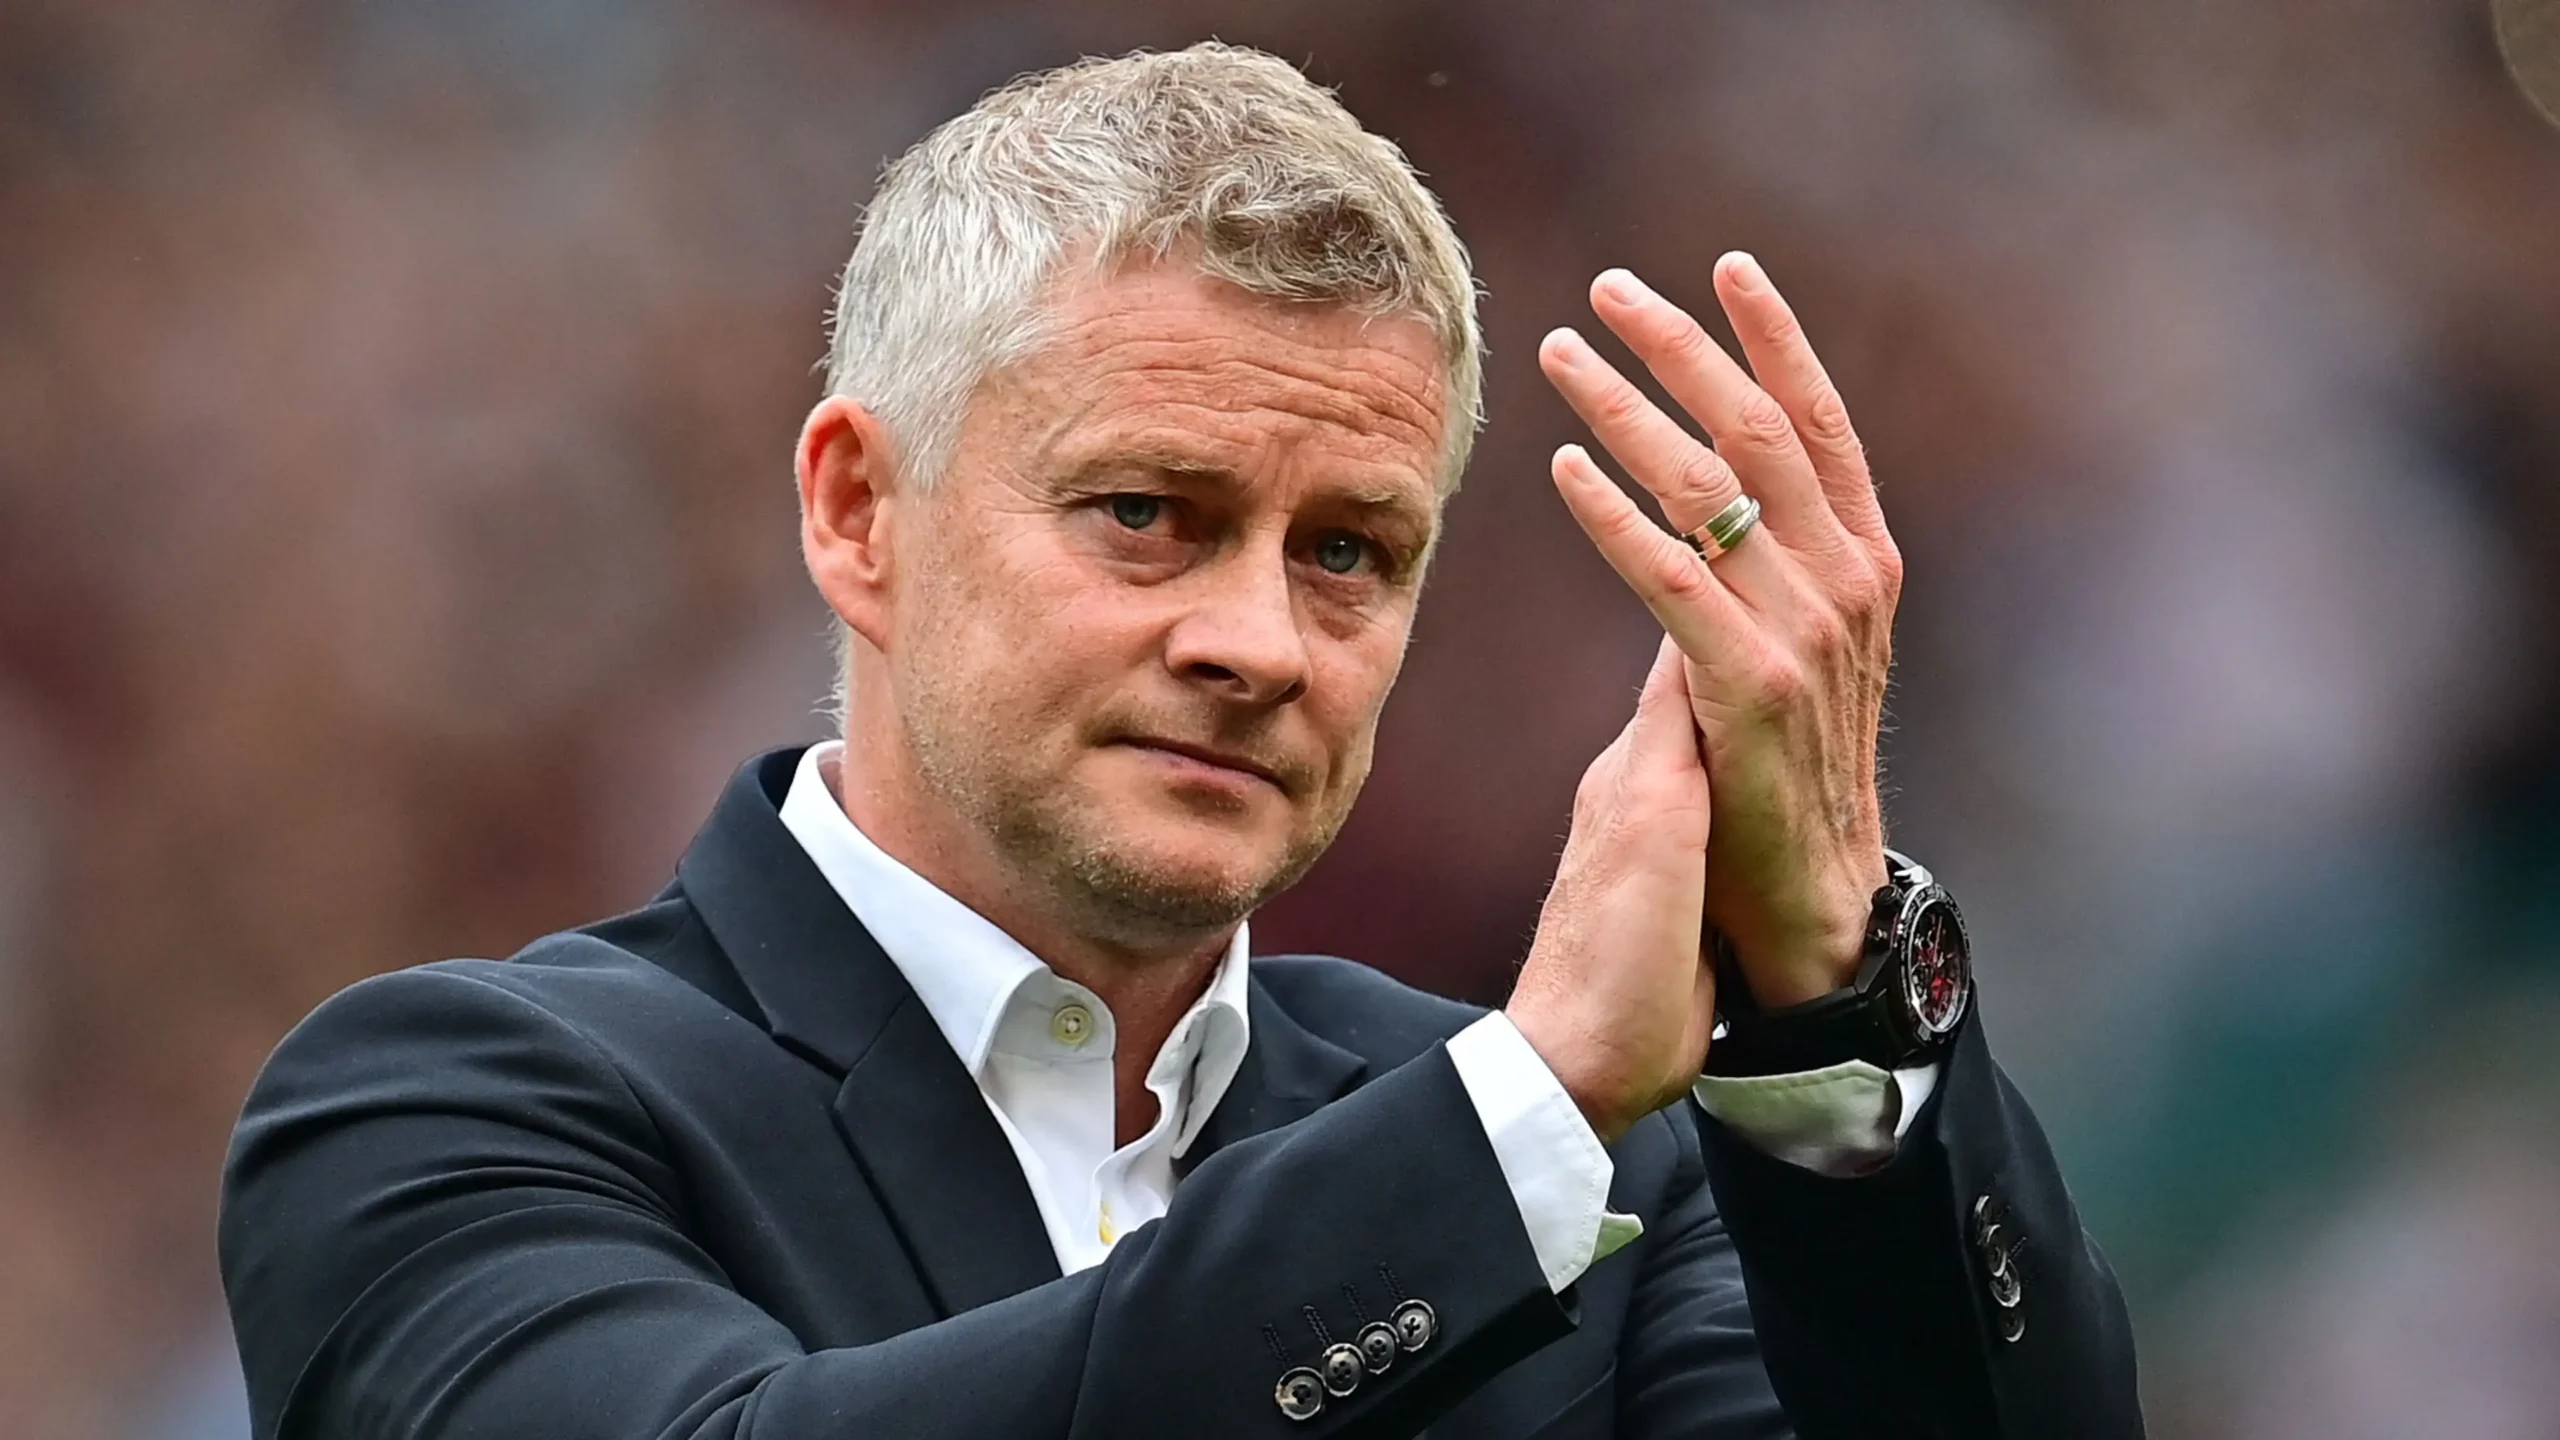 Bayern Munich is reportedly considering Ole Gunnar Solskjaer as manager to replace Tuchel